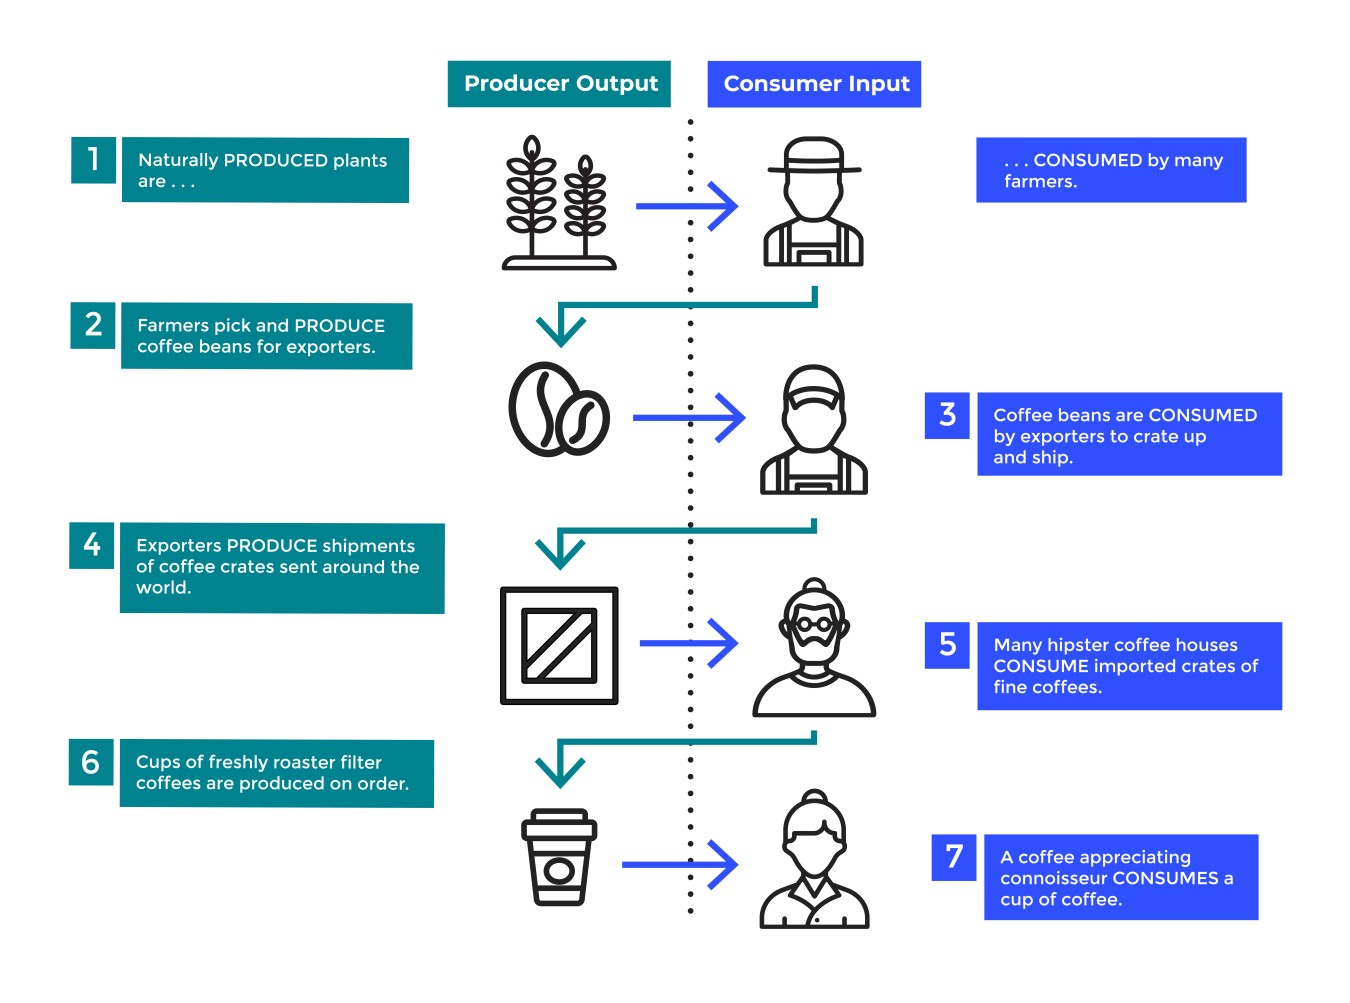 A value chain showing farming producers, exporter producers, coffee roasteries and hipsters.